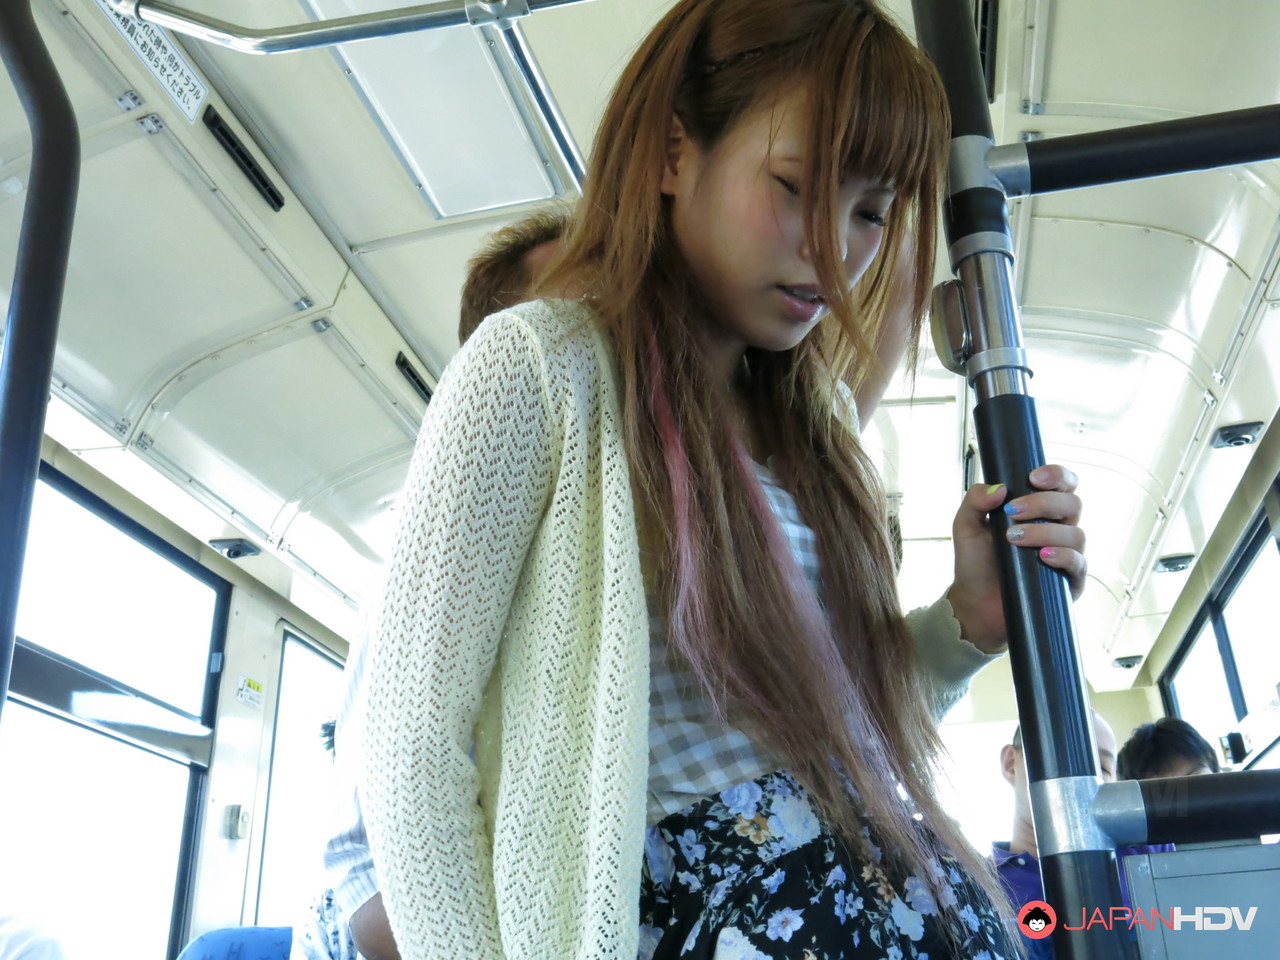 Japanese teen Marin Yuuki gets fucked by a bunch of passengers on the bus foto pornográfica #424345719 | Japan HDV Pics, Marin Yuuki, Gangbang, pornografia móvel